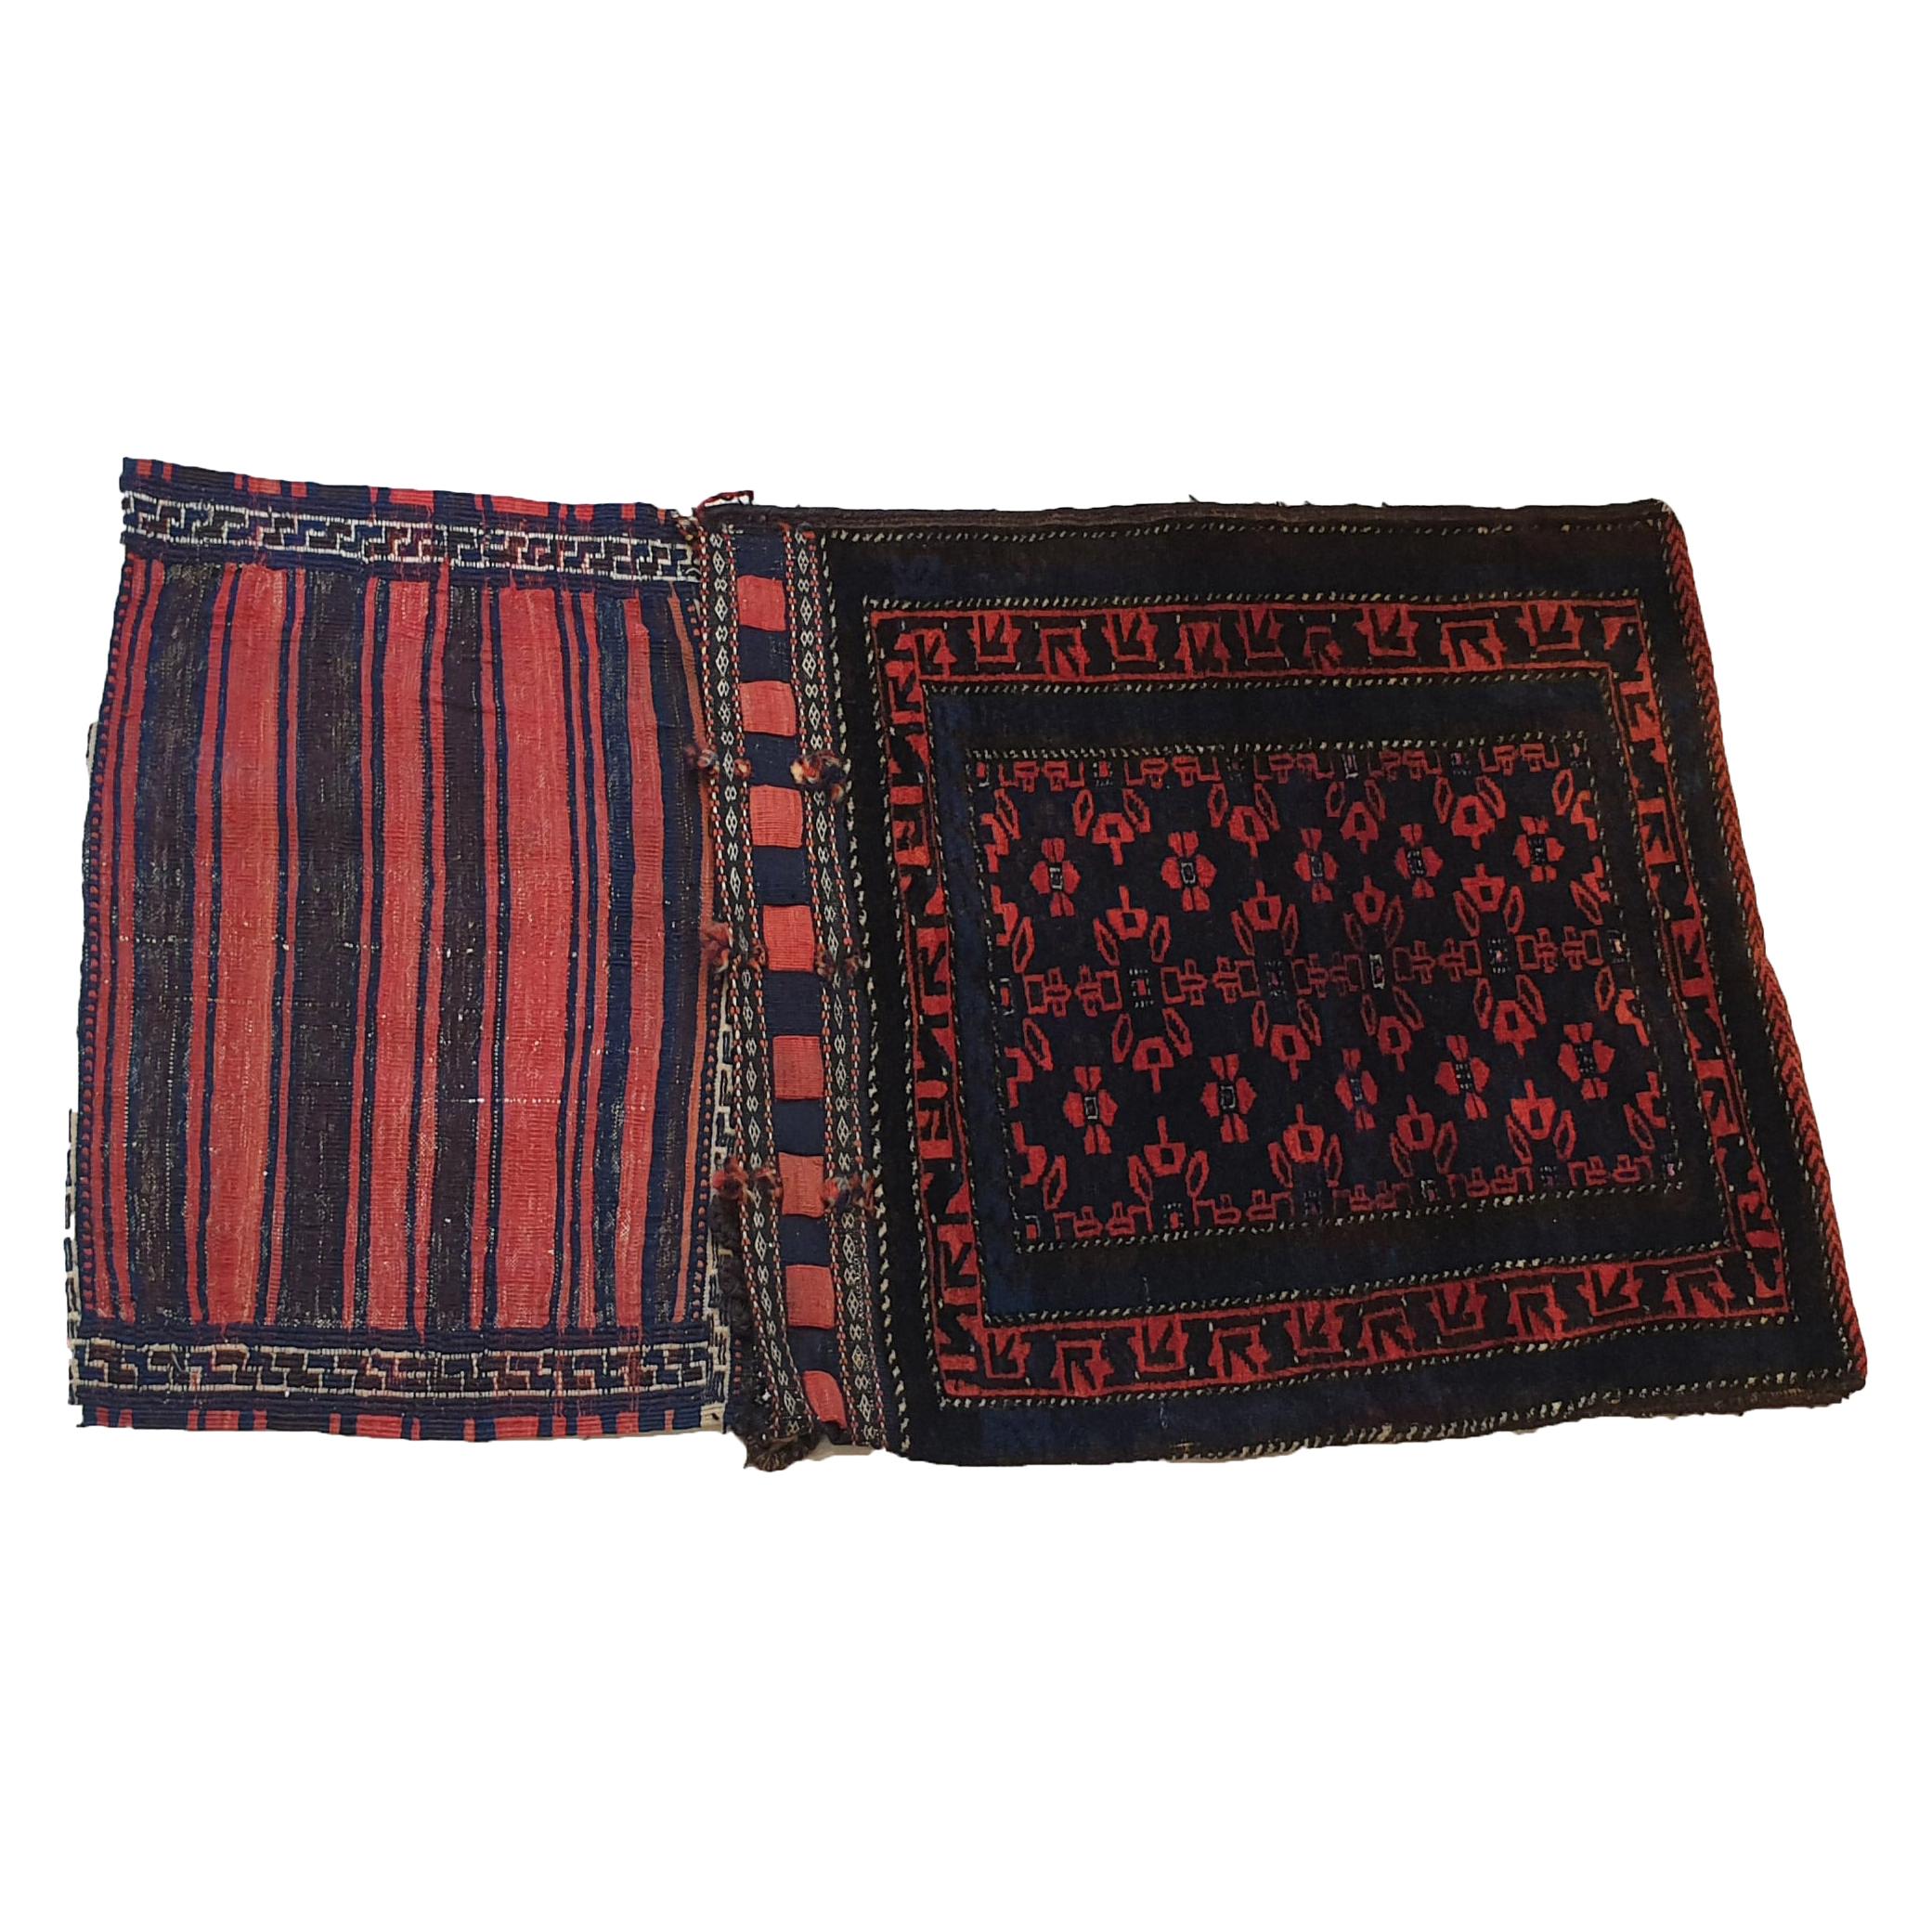 654 - Pretty Little Bukhara Saddle Bag with a Beautiful Design and Colors